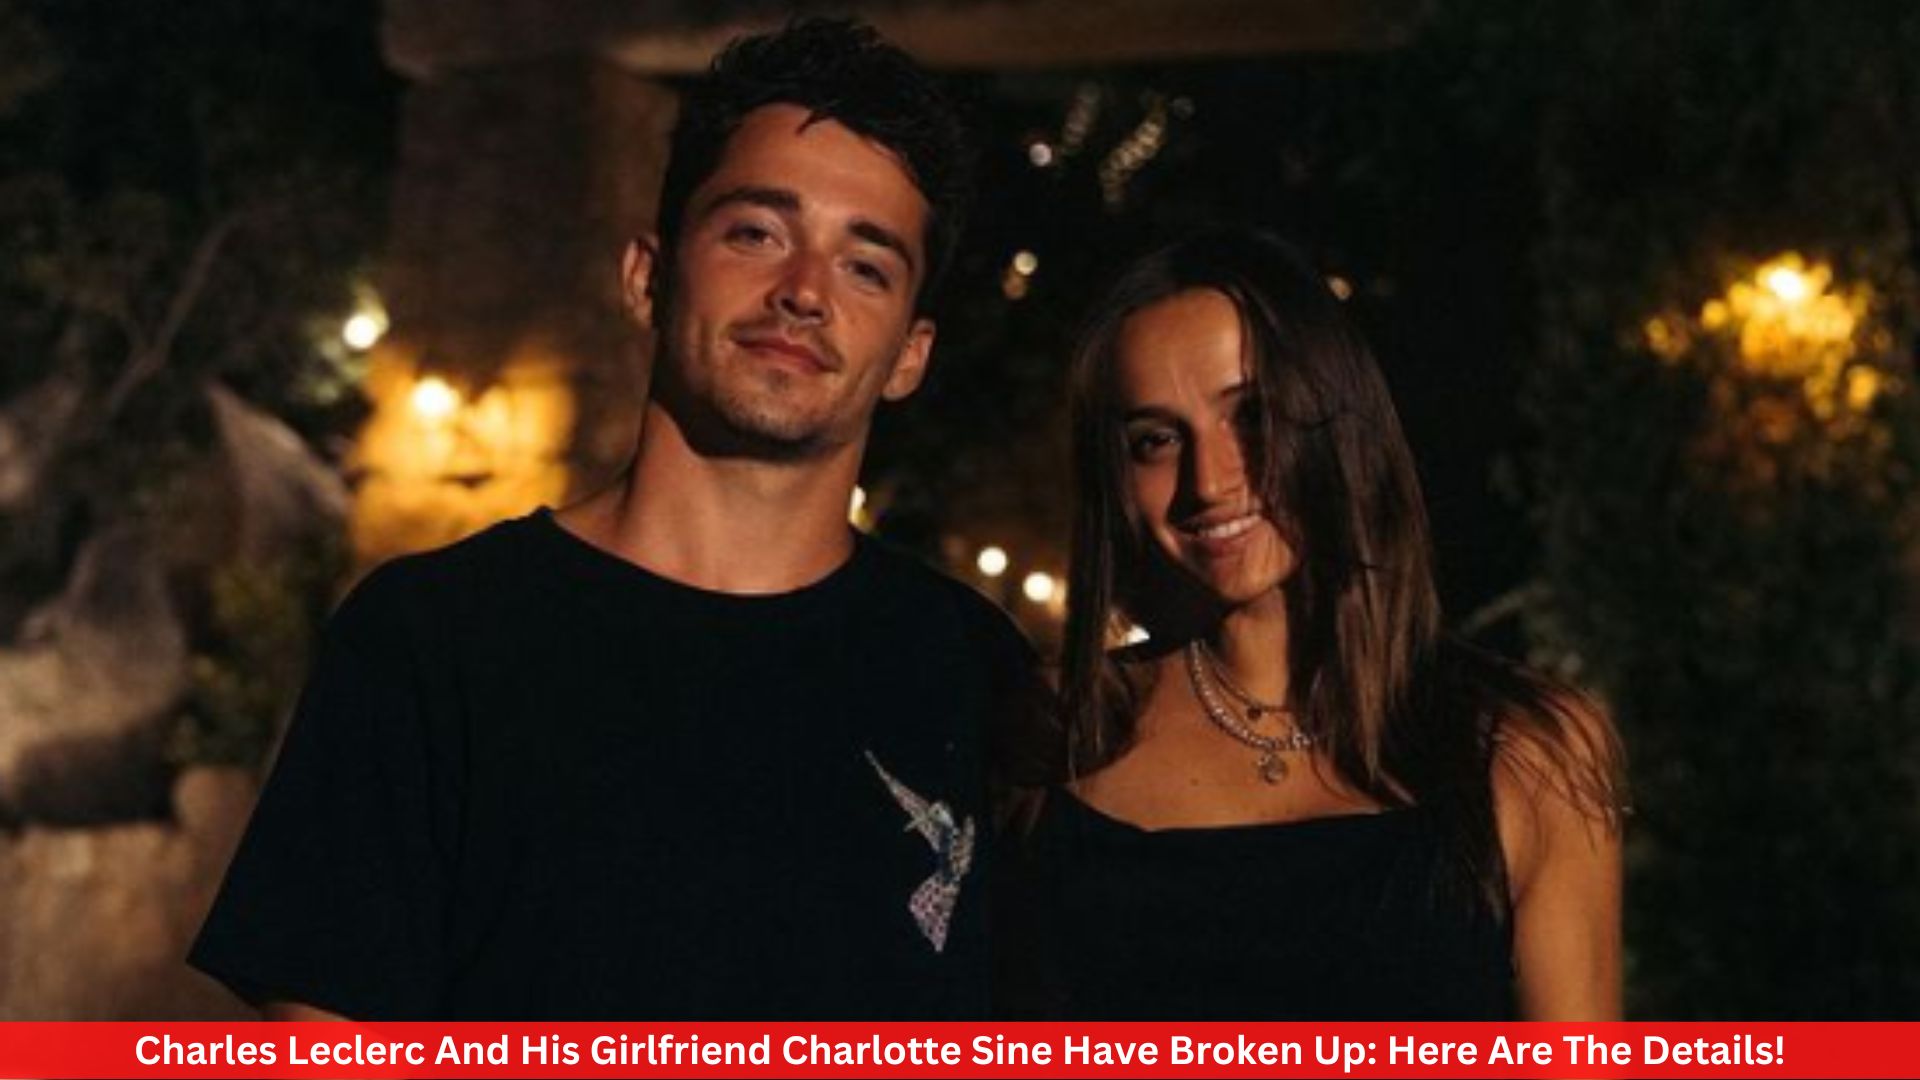 Charles Leclerc And His Girlfriend Charlotte Sine Have Broken Up: Here Are The Details!